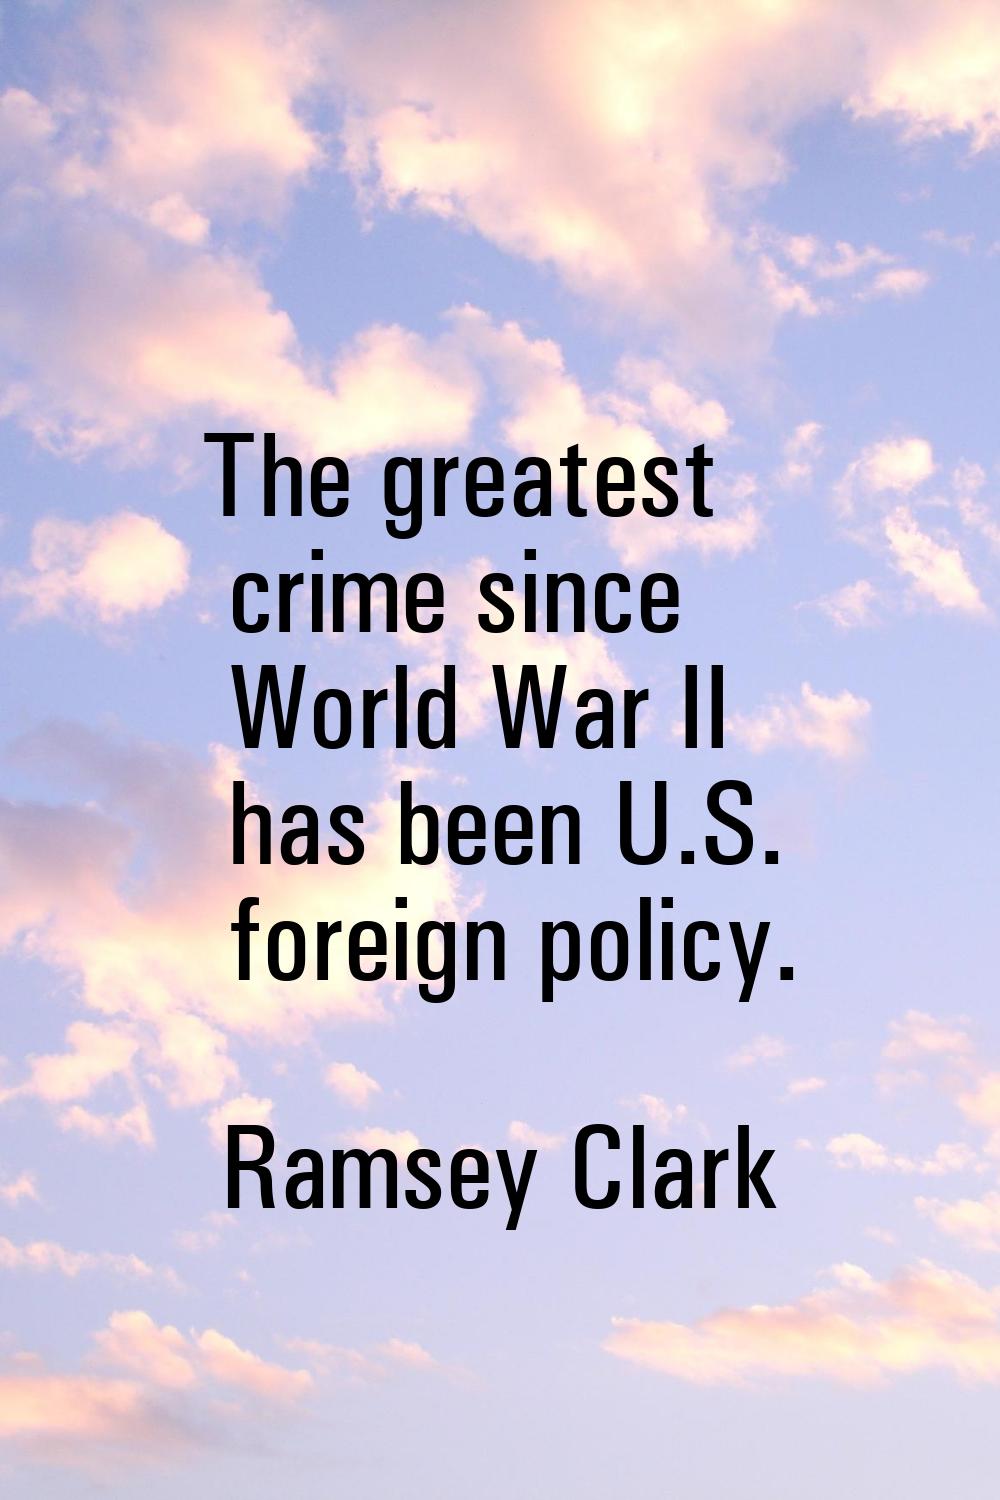 The greatest crime since World War II has been U.S. foreign policy.